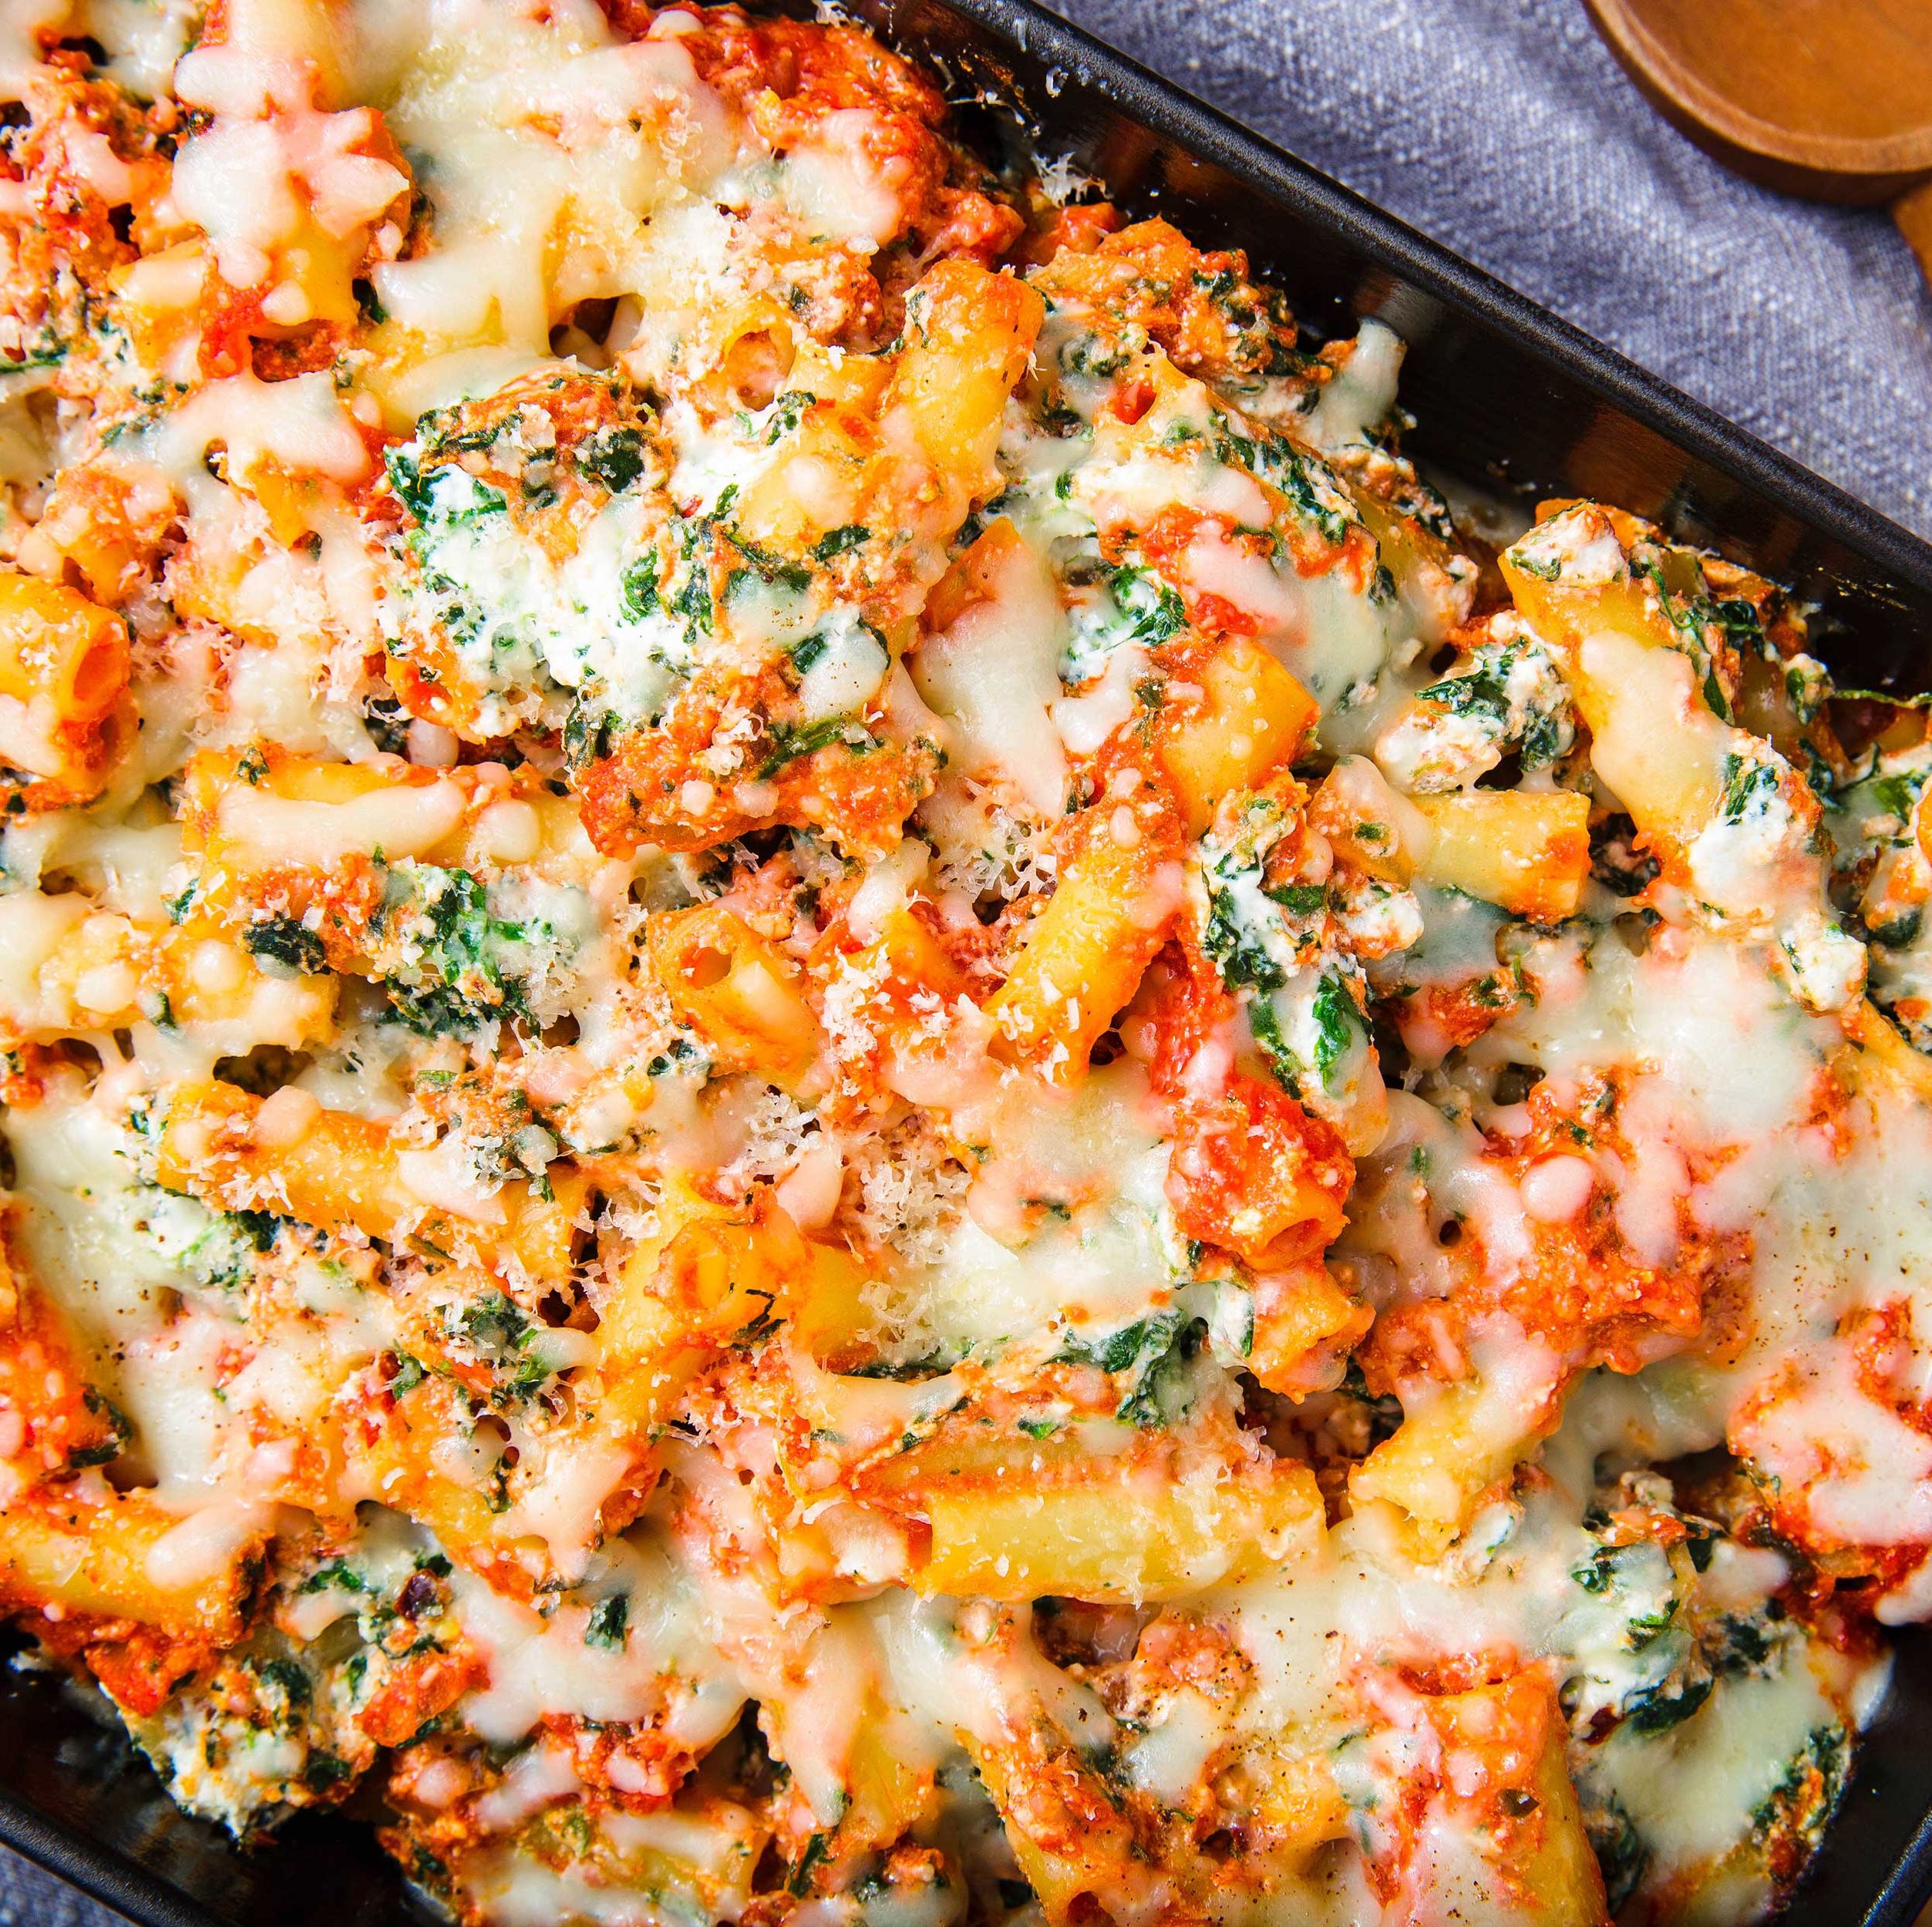 Treat Yourself To This Super Comforting Vegetarian Baked Ziti